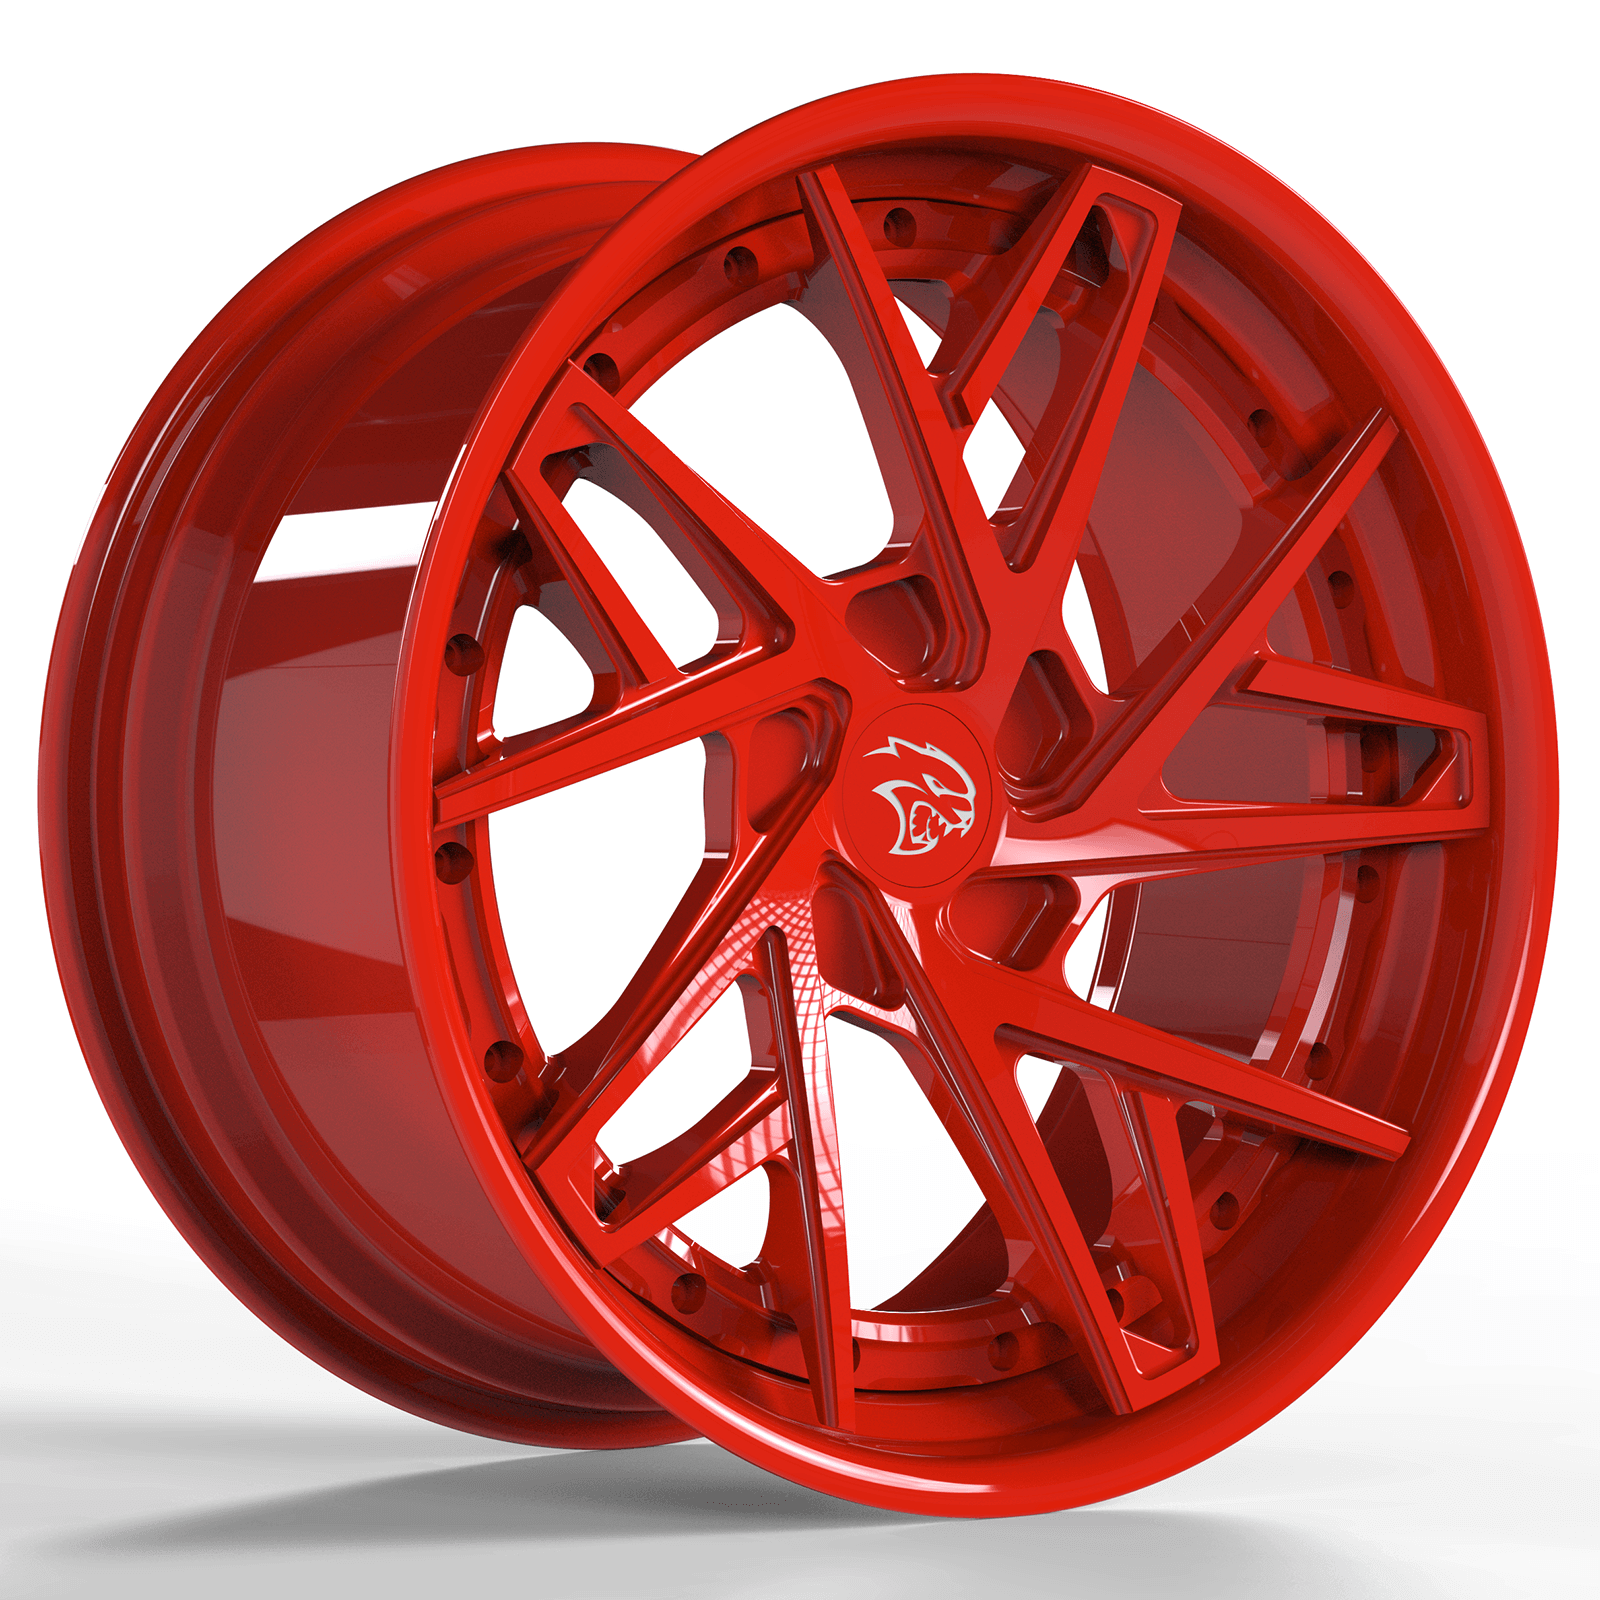 2 PIECE FORGED GLOSS BLACK AND RED WHEEL SERIES: RV-DS74 - RVRN WHEELS